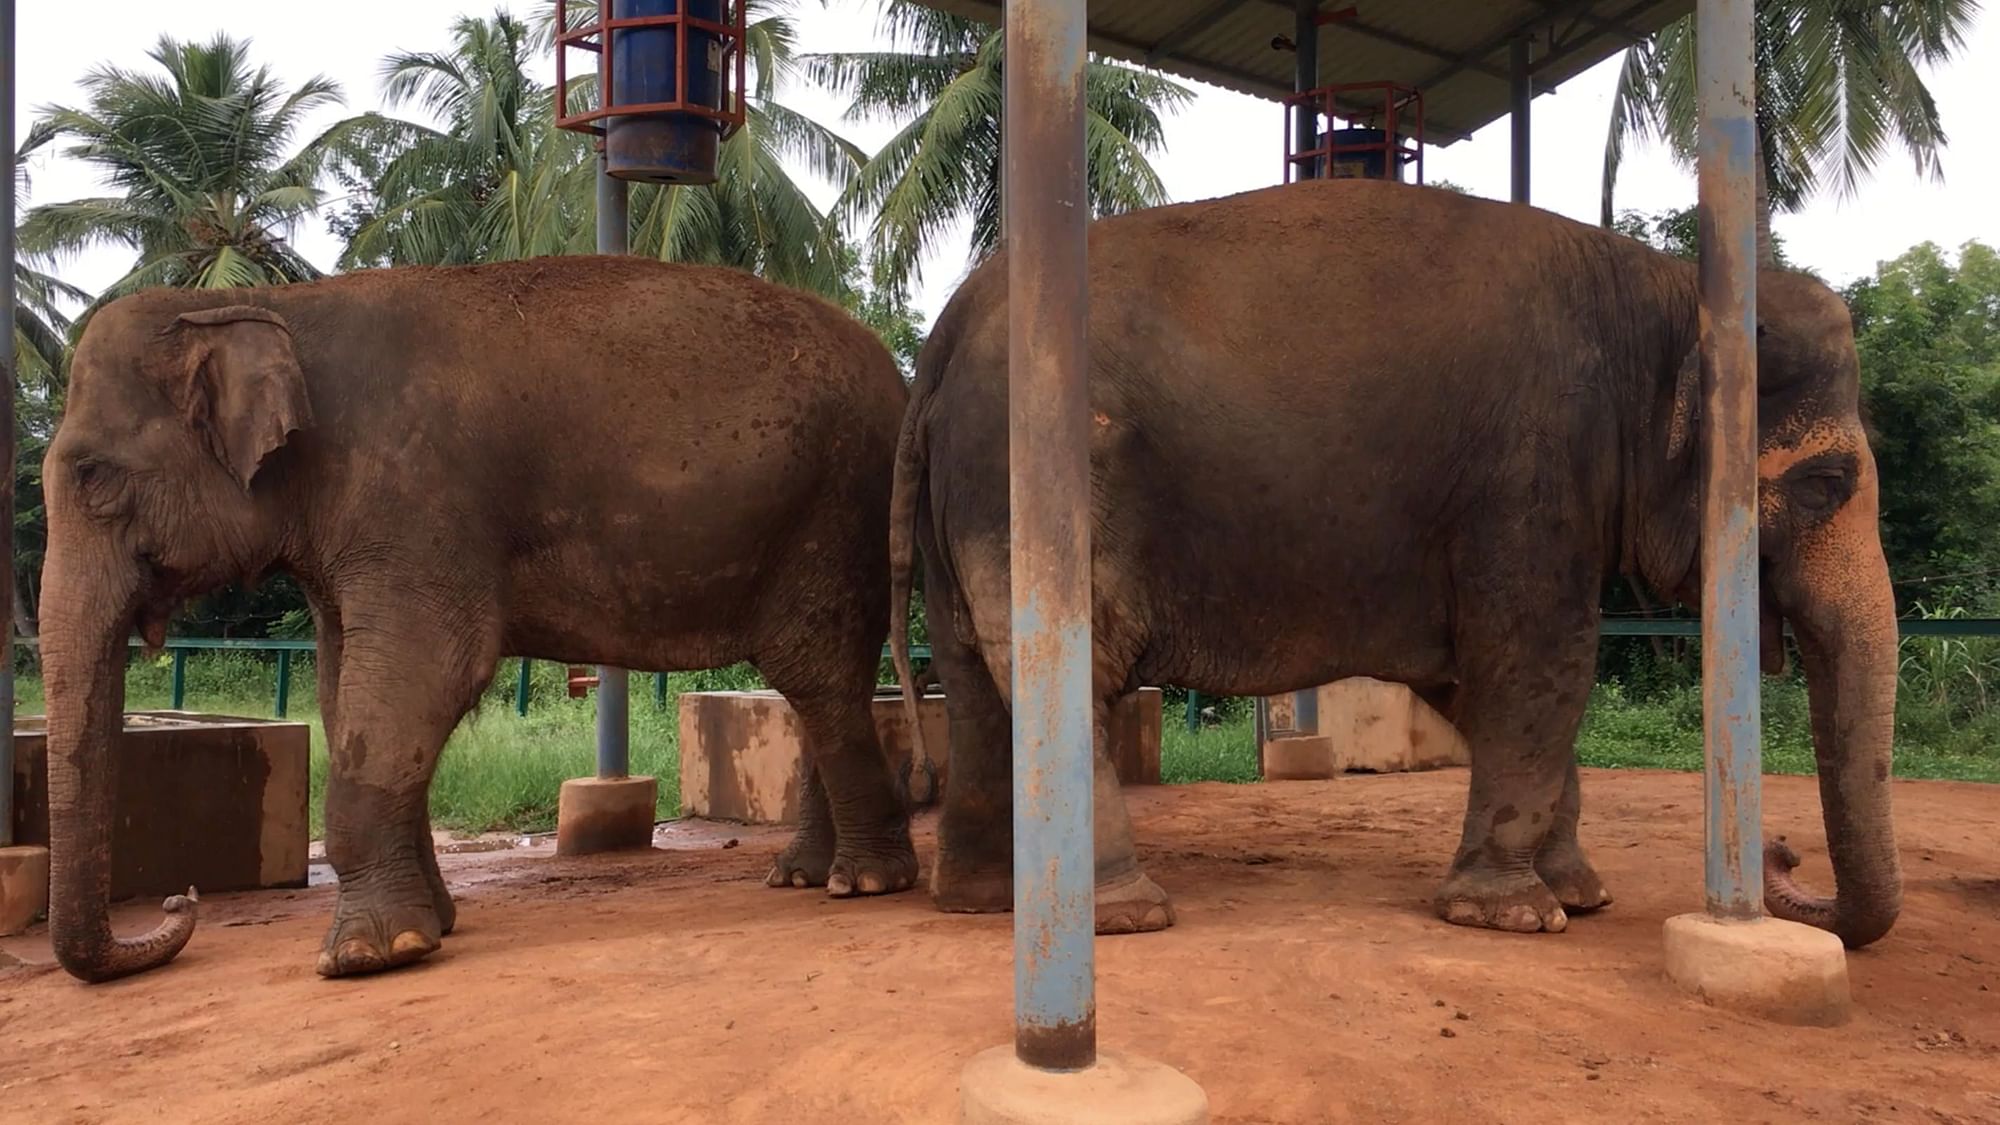 Does a chain-free facility for elephants have to be in violation of the captive elephants’ guidelines?&nbsp;